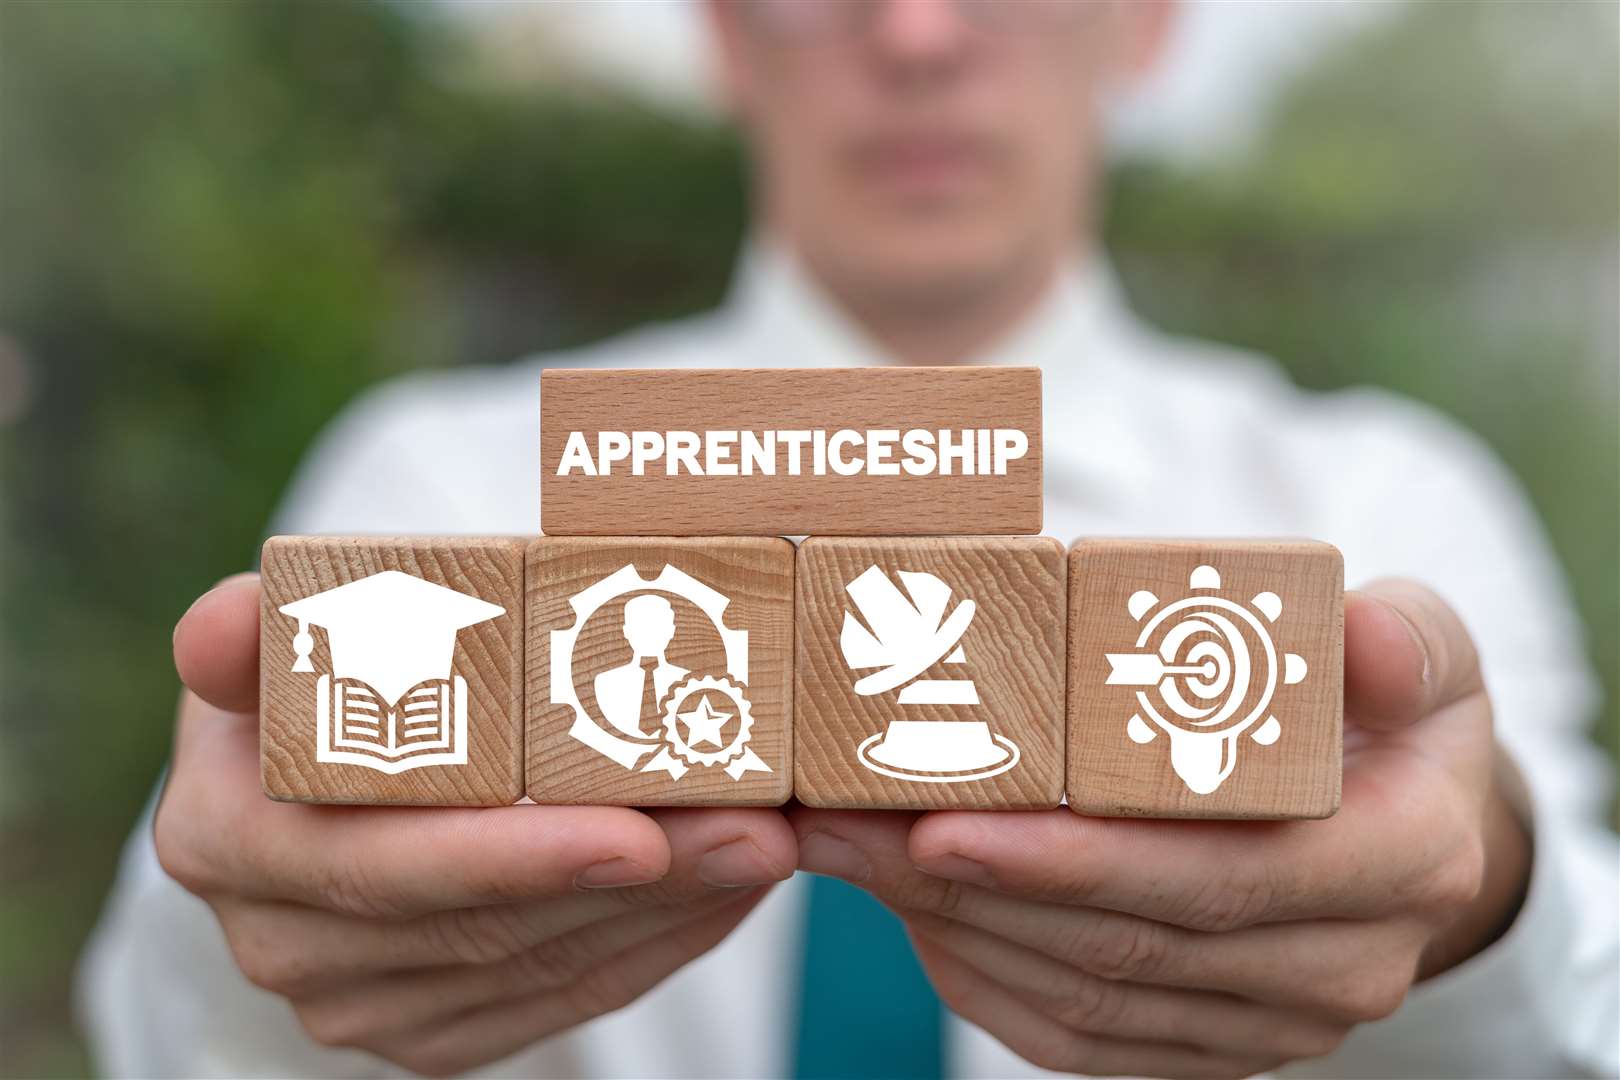 There will be a chance to find out more about apprenticeships at the forthcoming apprenticeship marketplace.